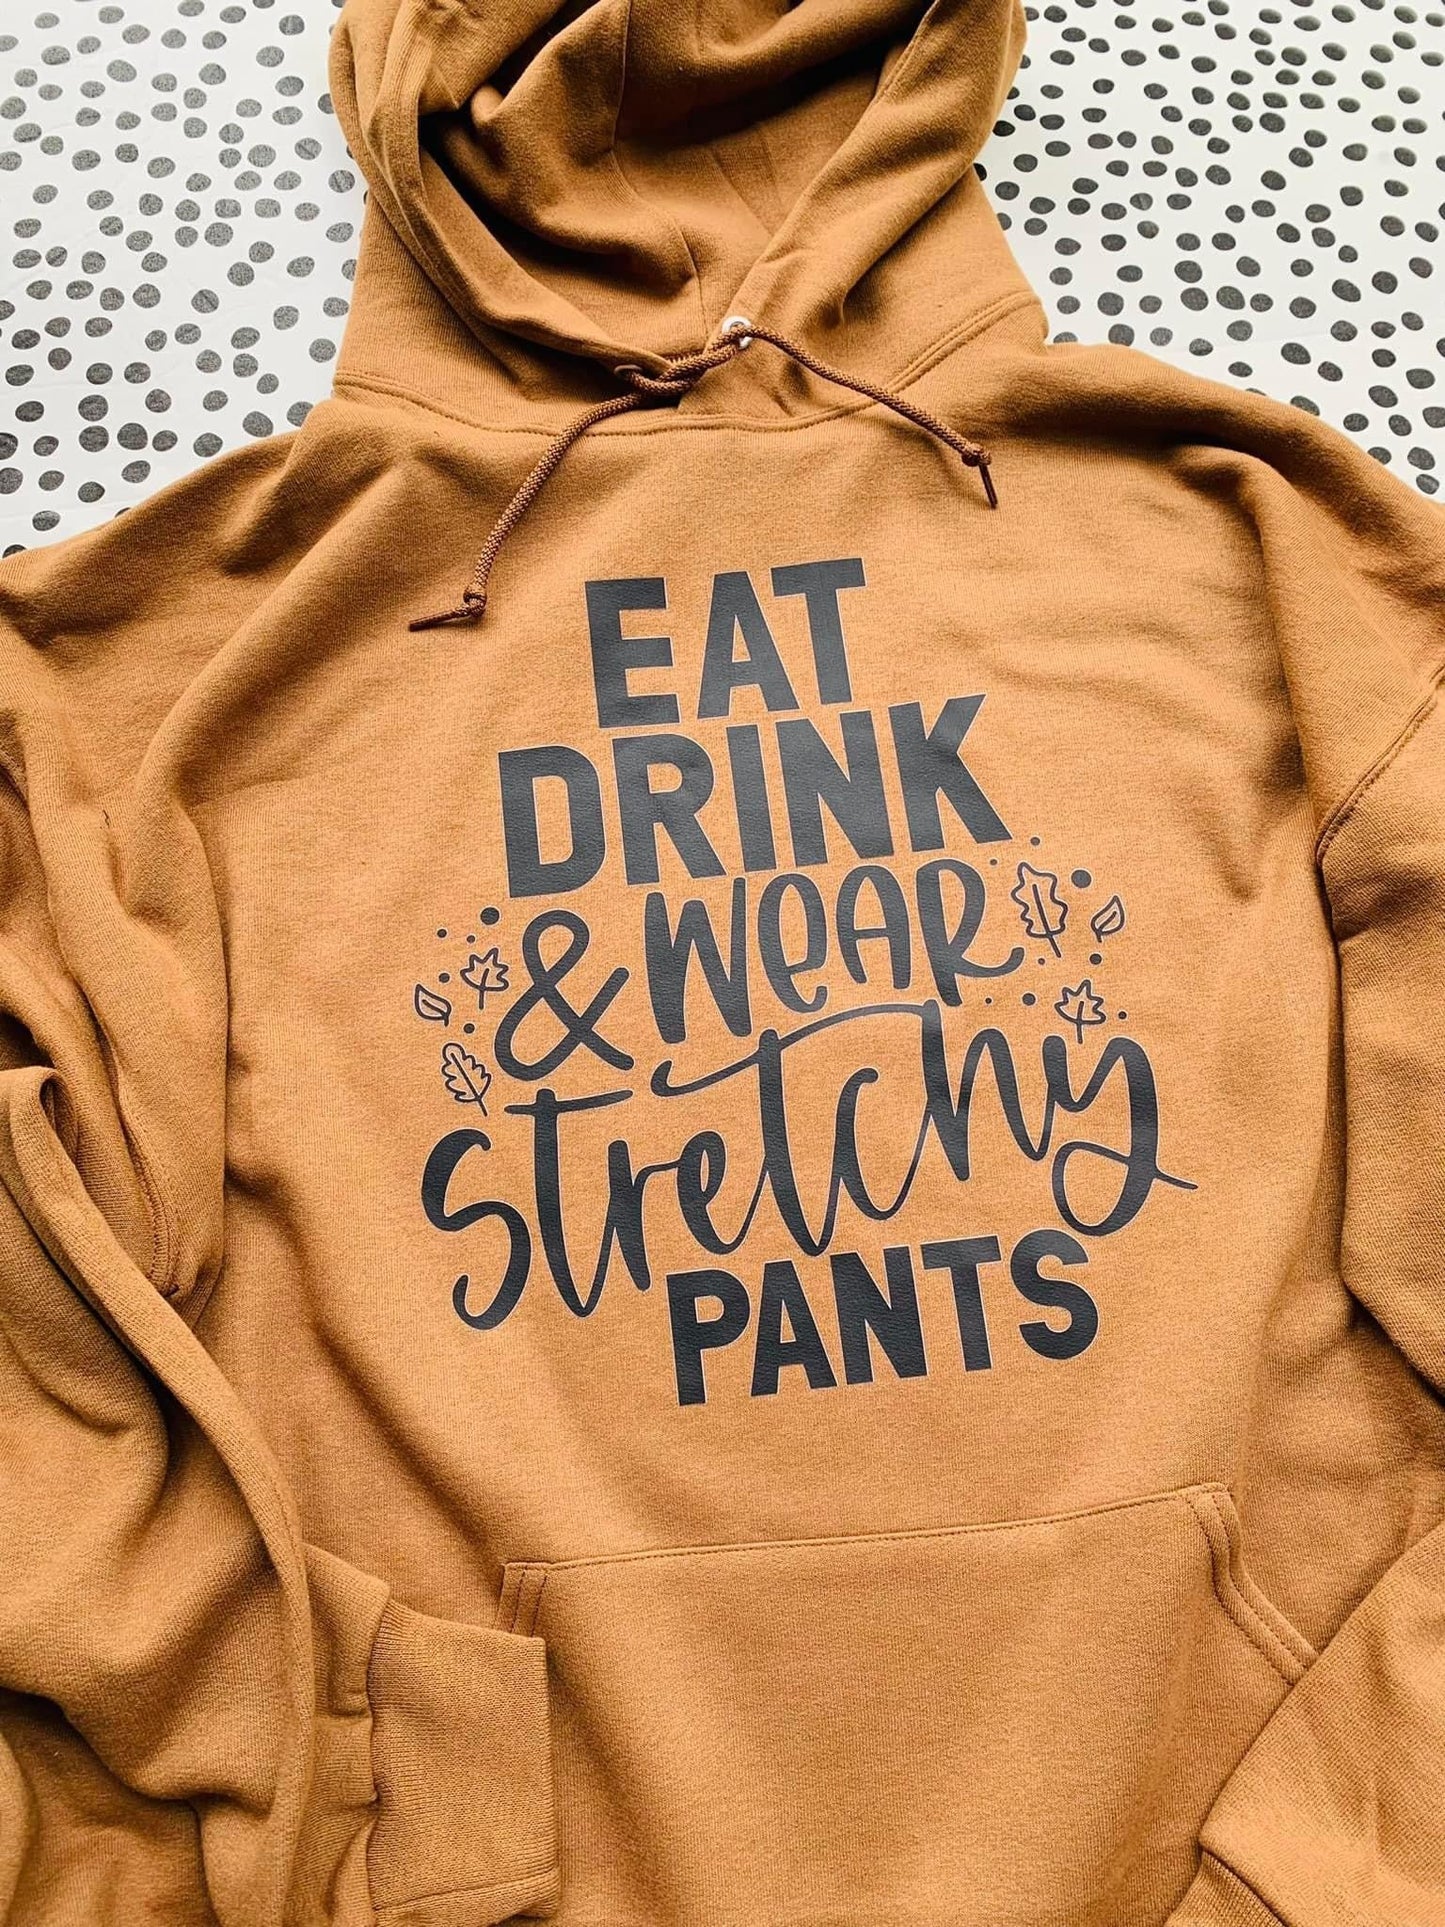 Eat Drink And Wear Stretchy Pants